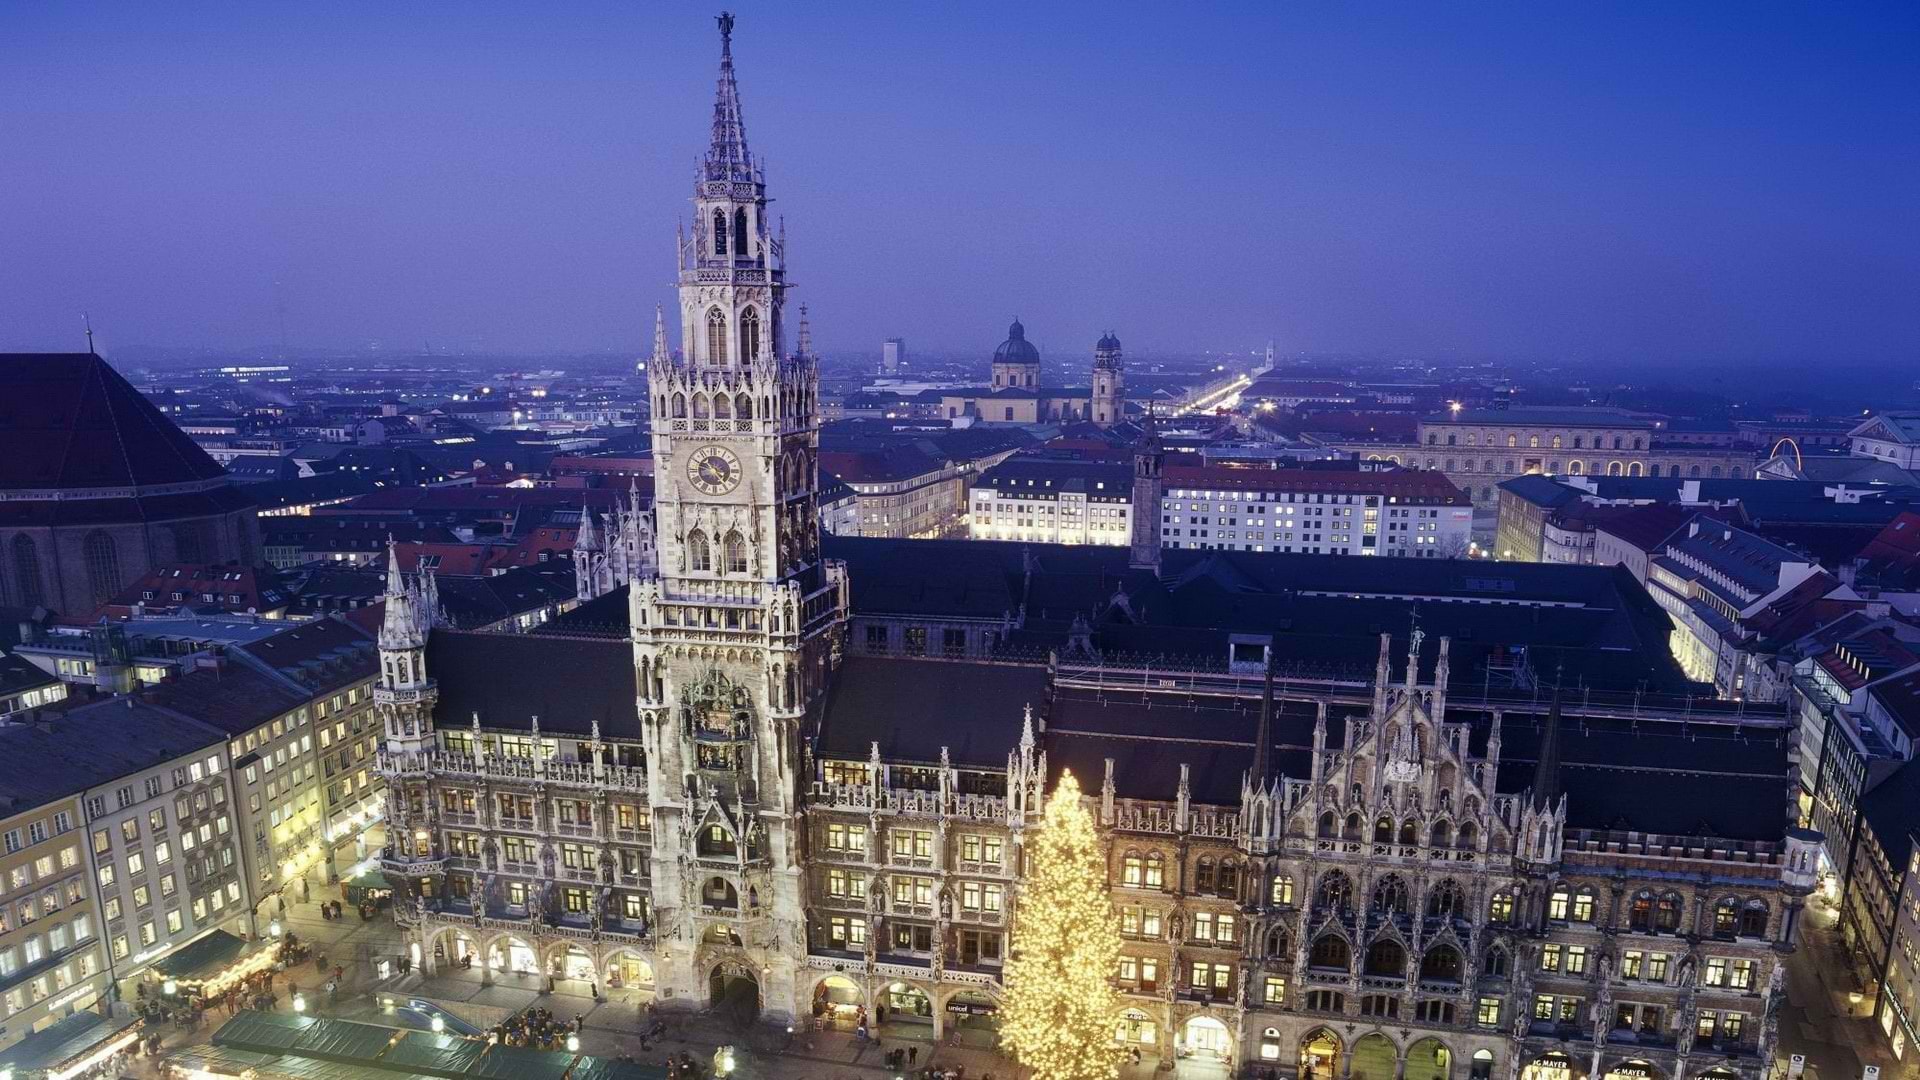 Heiliggeistkirche and Old Town Hall, Munich, Germany без смс